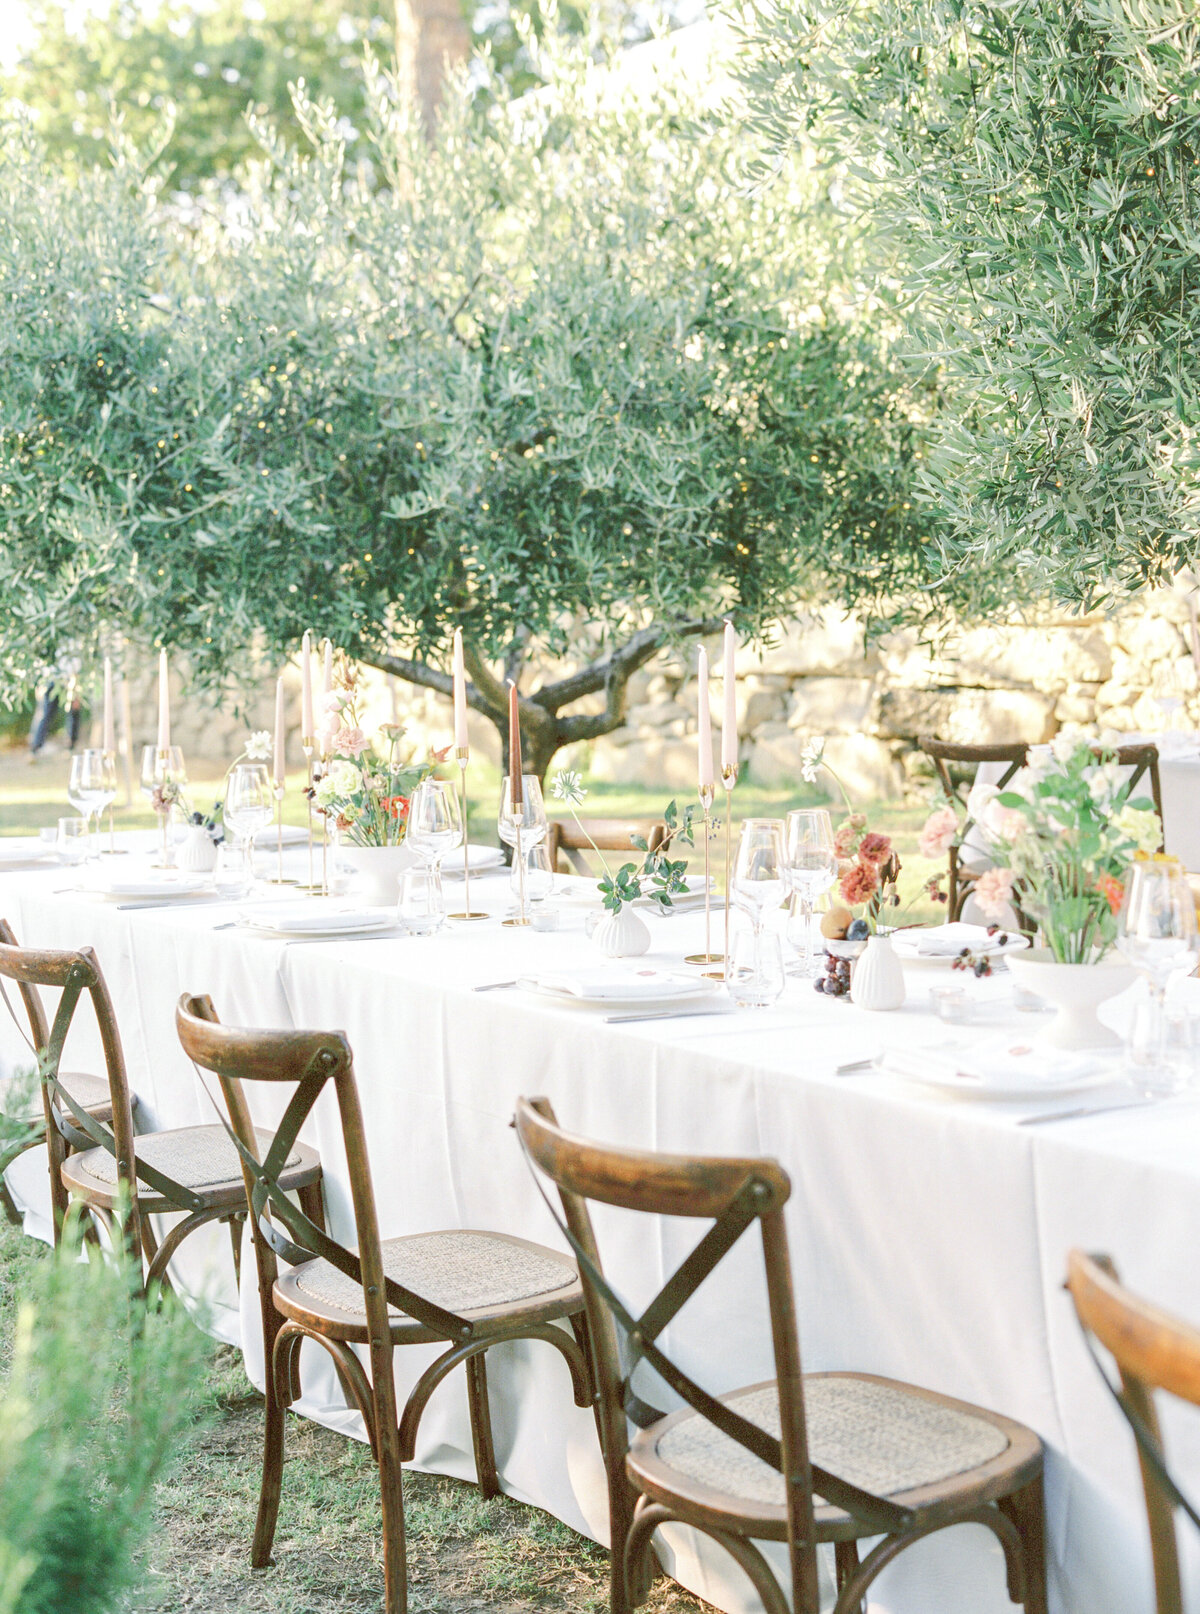 Film photograph of wedding reception tables among olive trees in tuscany photographed by Italy wedding photographer at Villa Montanare Tuscany wedding